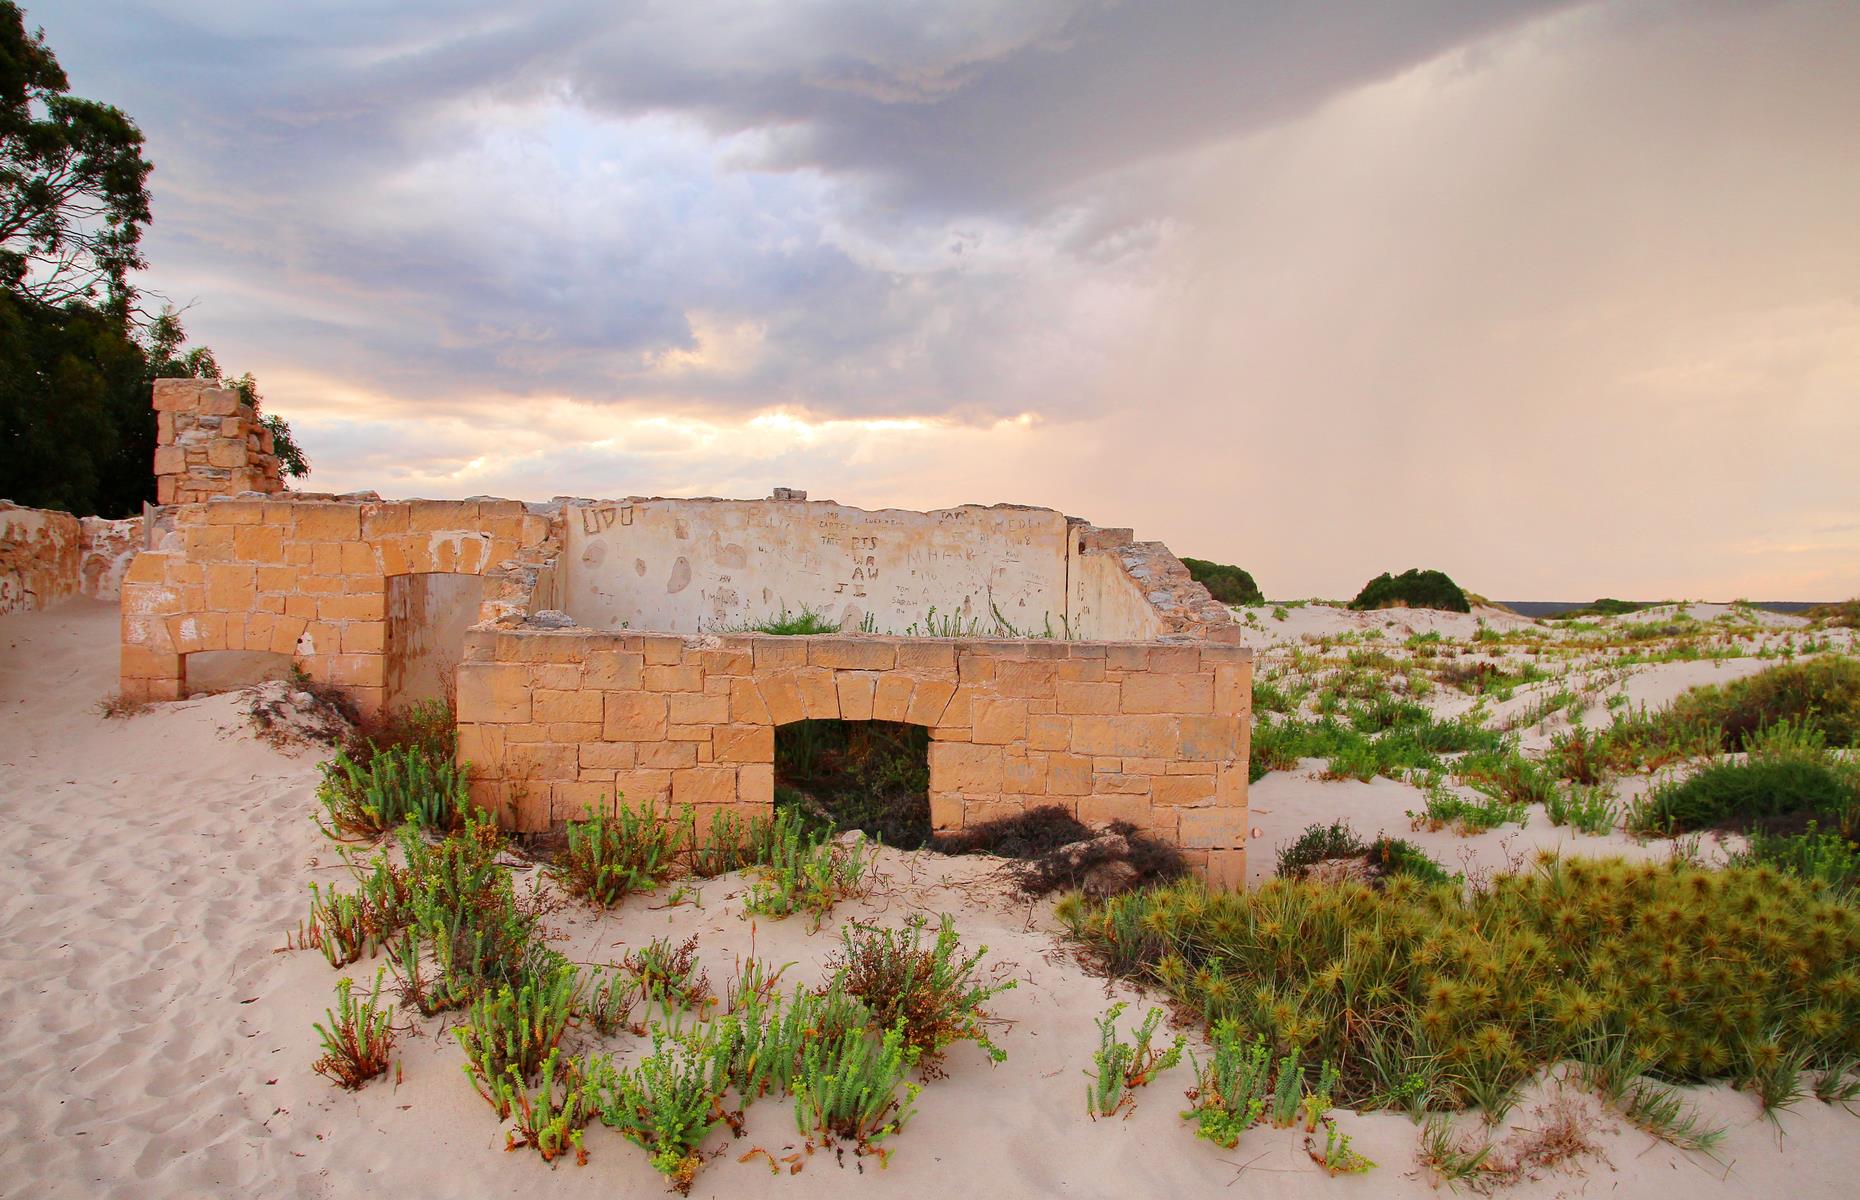 <p>Almost submerged beneath the shifting sand dunes sits what's left of an old telegraph station. Located in what's now isolated Eucla, the original township in the Nullarbor Plain was established in 1877 as a manual repeater station for the overland telegraph. It was the largest telegraph station outside of the main cities. All that remains of the town lies under the sand, due to large sand drifts caused by a plague of rabbits eating the dune vegetation. These sand-strewn ruins are said to be haunted by a ghost – perhaps a ghostly rabbit?</p>